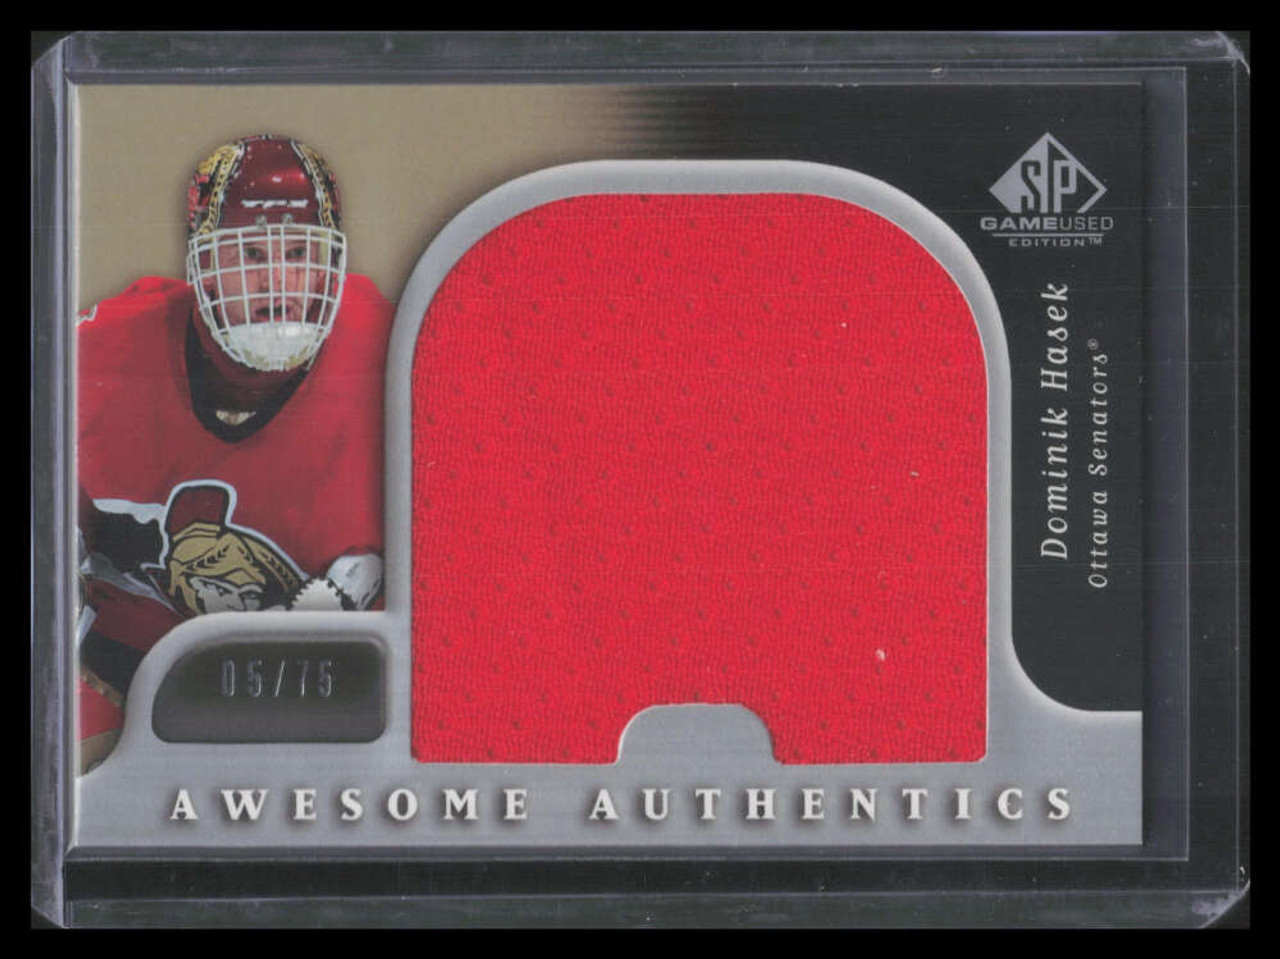 2005-06 SP Game Used Awesome Authentics Gold Jaromir Jagr Jumbo Jersey  12/25 - Sportsnut Cards